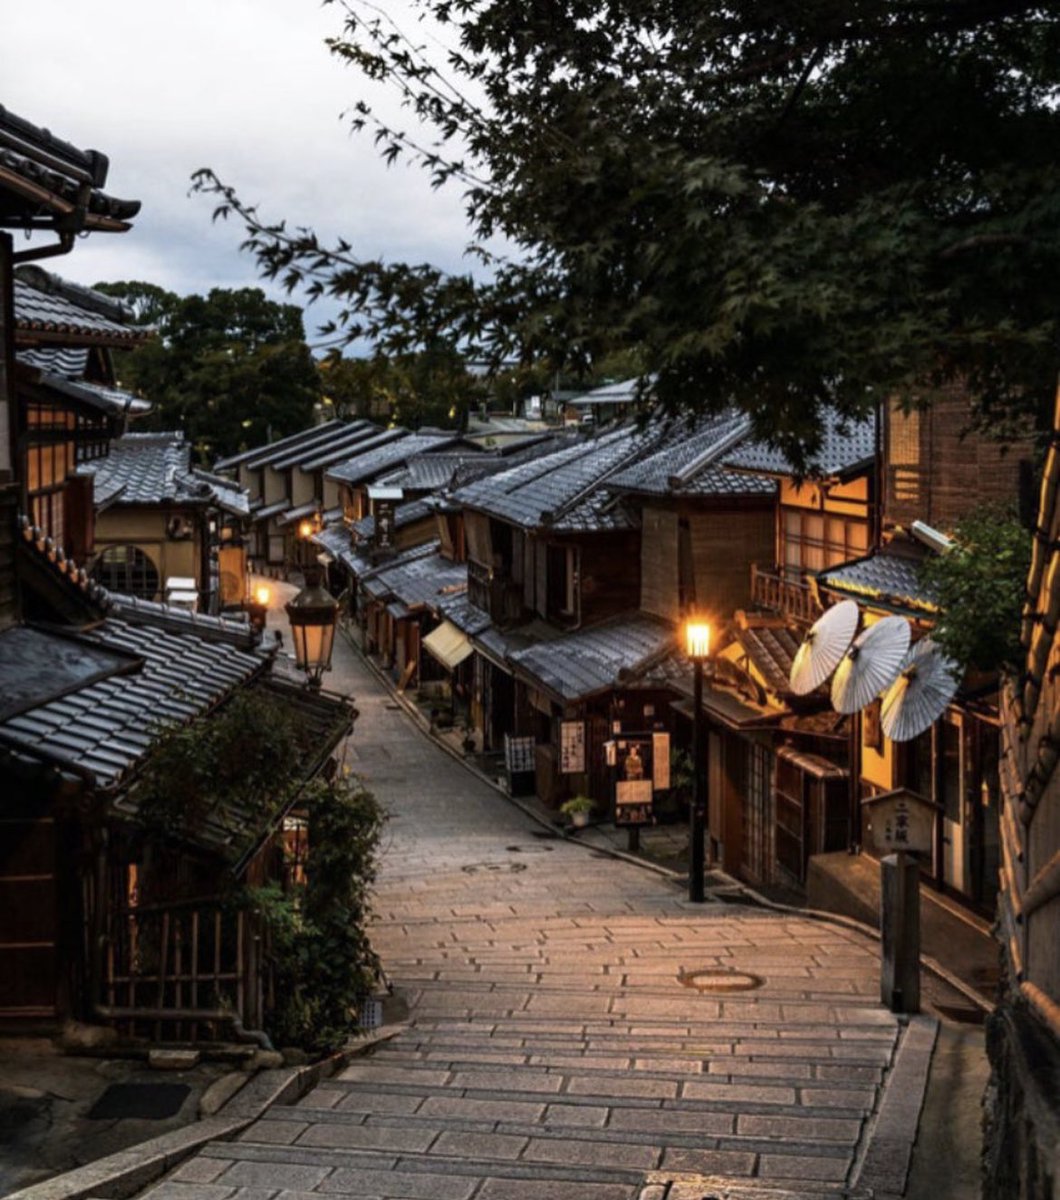 Kyōto, founded in 794, is a city with a rich history spanning over a thousand years. It was once the capital of Japan and boasted one of the largest populations of any city worldwide.

This city is home to a remarkable array of cultural treasures, including more than 1,650